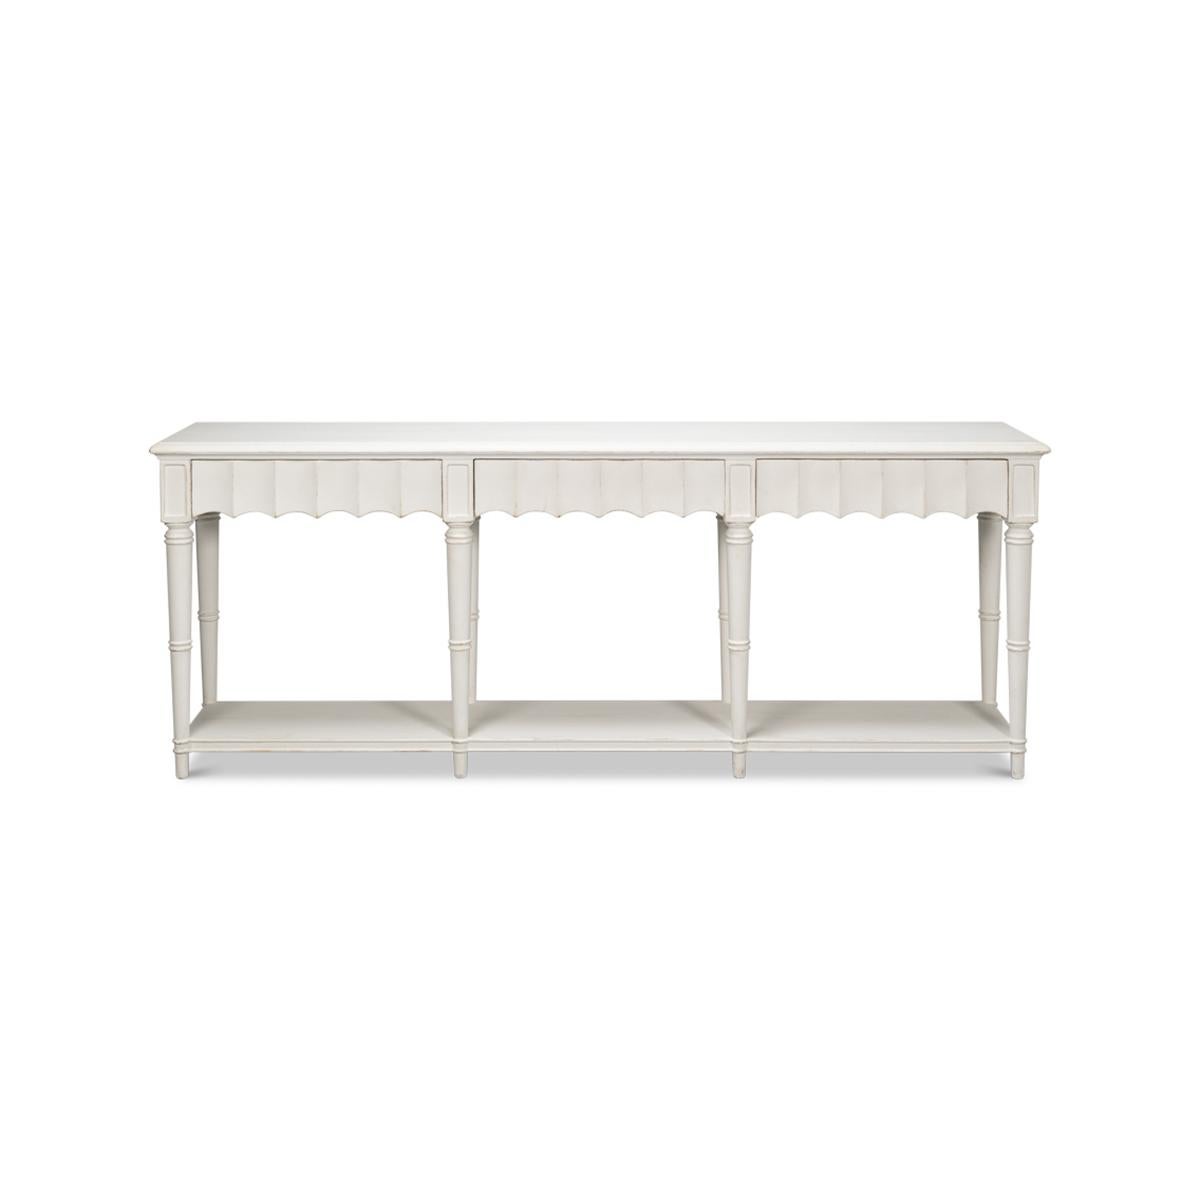 A Country console table in a hand-rubbed antique white finish. The front apron of this piece has a beautiful fluted design. It has three drawers, eight turned and tapered legs, and a shelf stretcher base. 

Dimensions: 93